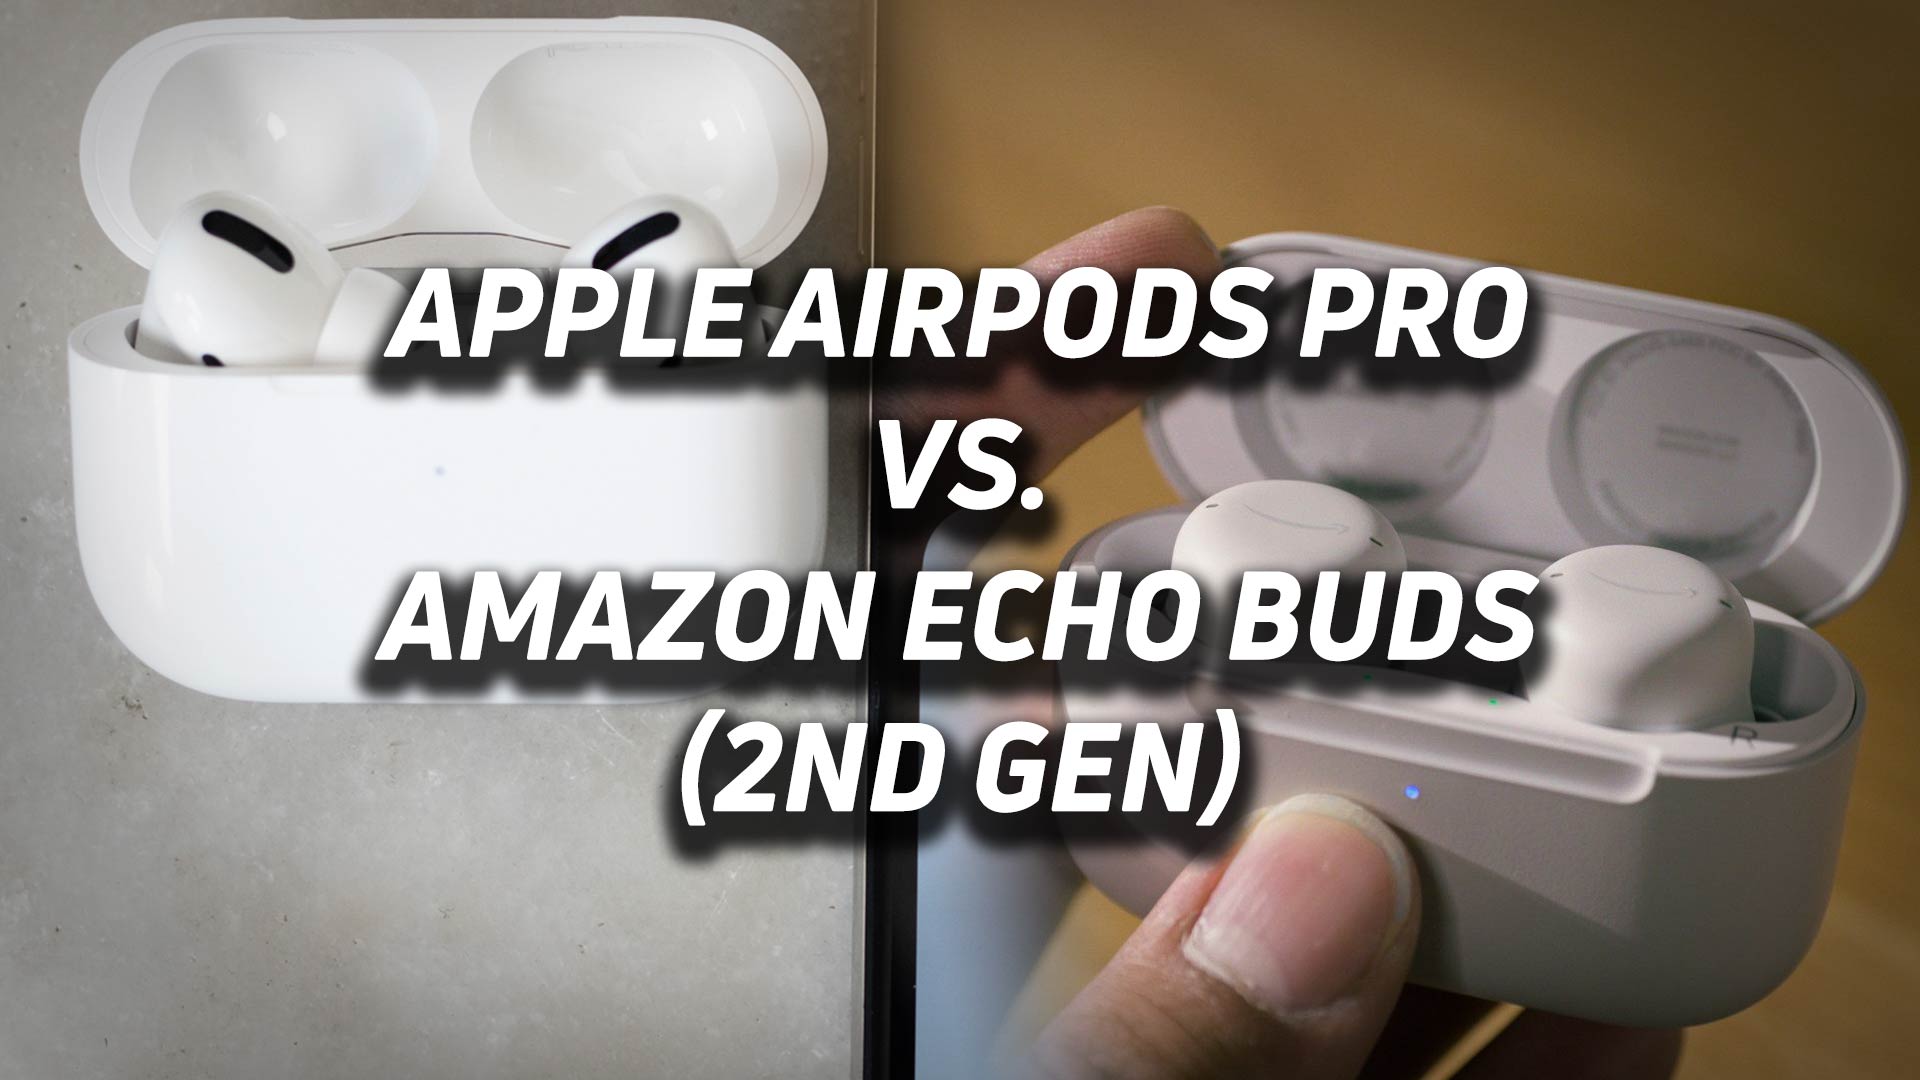 A blended image of the Apple AirPods Pro and Amazon Echo Buds (2nd Gen) true wireless noise canceling earbuds with the versus text overlaid.